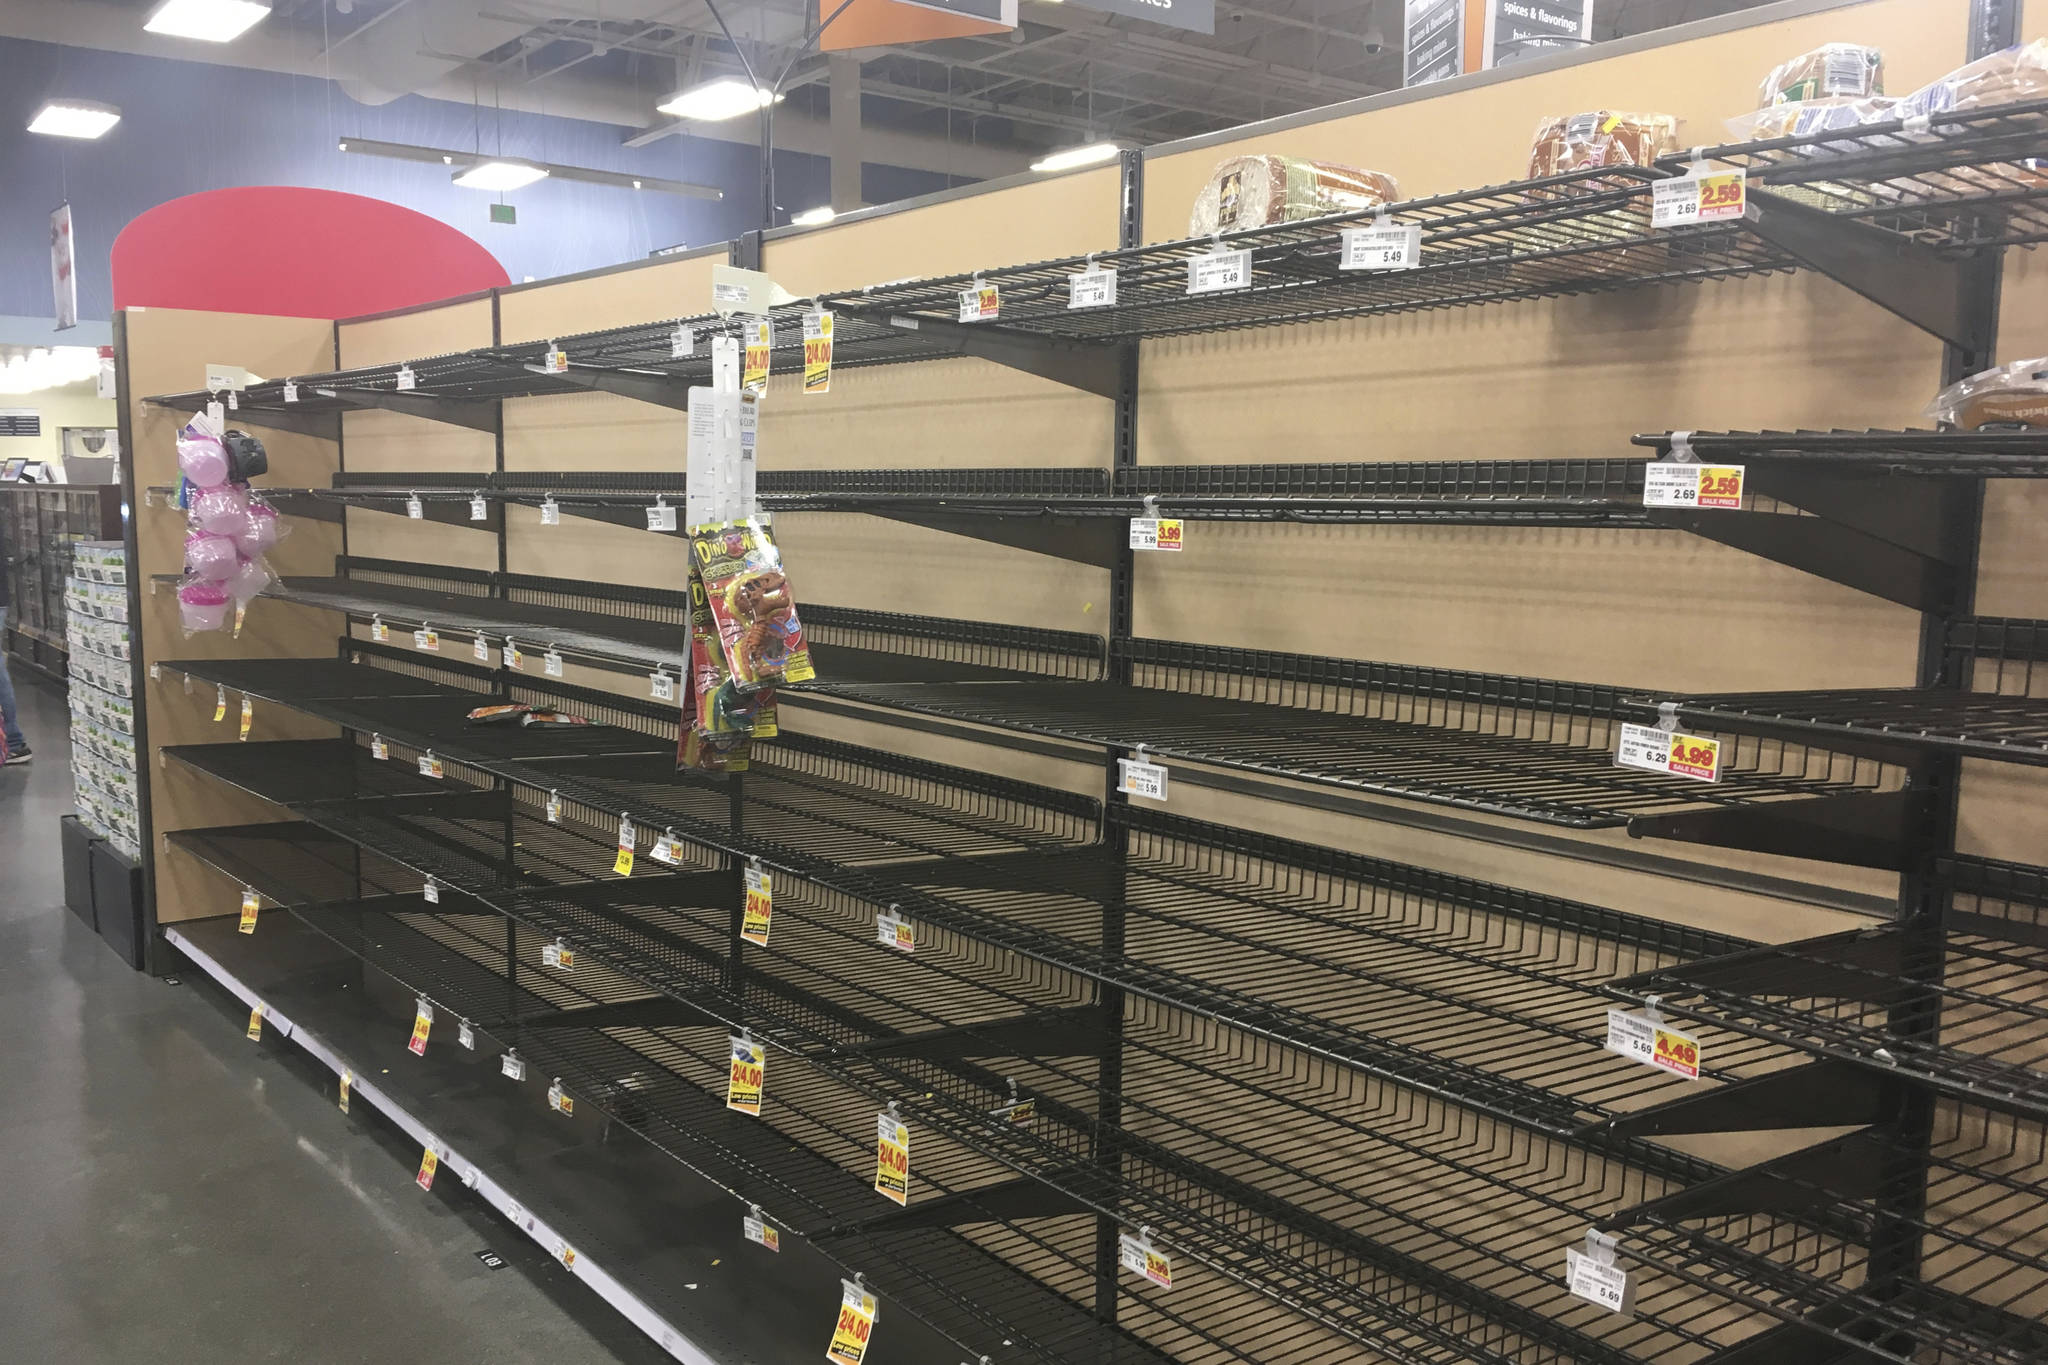 Empty shelves where bread is normally located are shown at a grocery store in Anchorage, Alaska, on Sunday, Dec. 2, 2018, two days after a magnitude 7.0 earthquake was centered about 7 miles north of the city. Anchorage officials urged residents not to stock up and hoard supplies because the supply chain of goods was not interrupted. (AP Photo/Mark Thiessen)